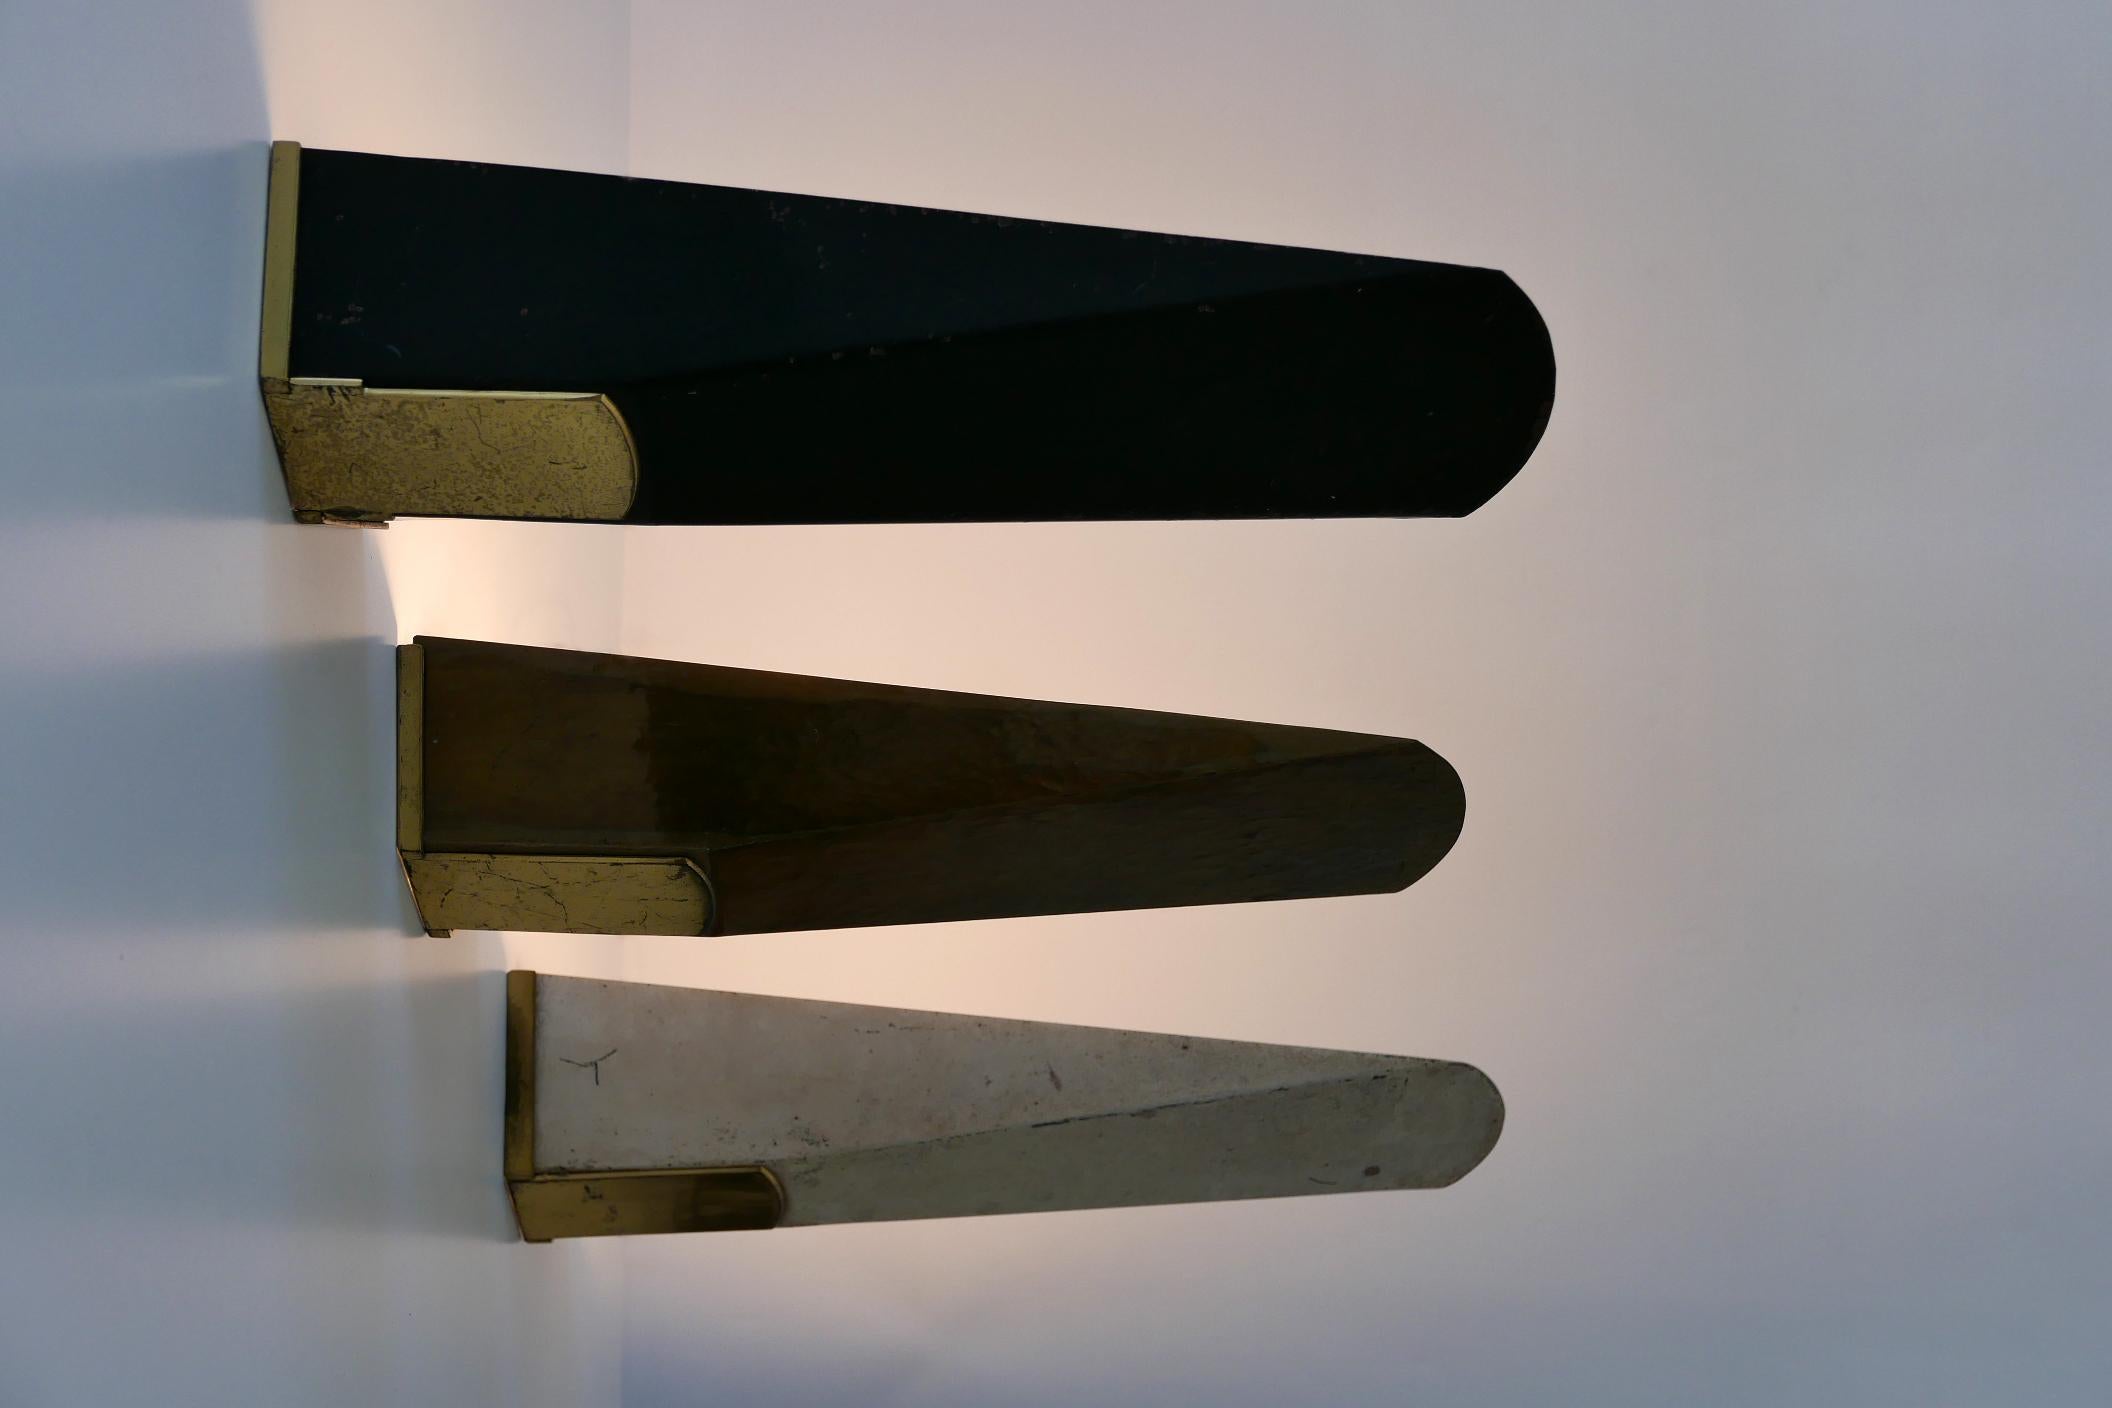 Set of Three Large Mid-Century Modern Wall Lamps or Sconces, 1950s, Germany For Sale 2